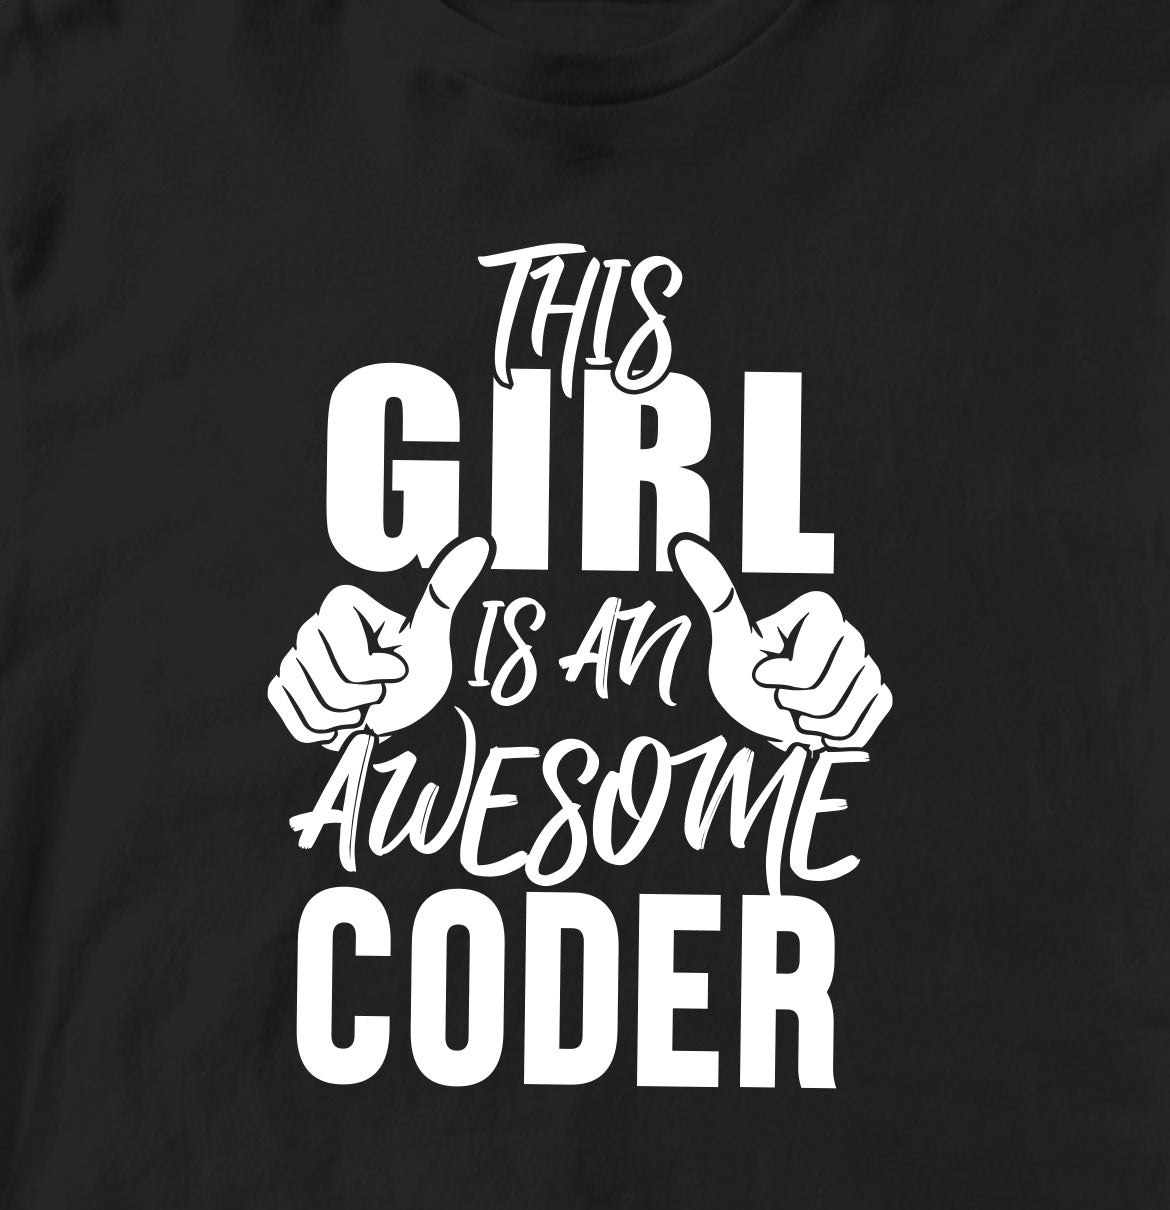 THIS GIRL IS AN AWESOME CODER TSHIRT